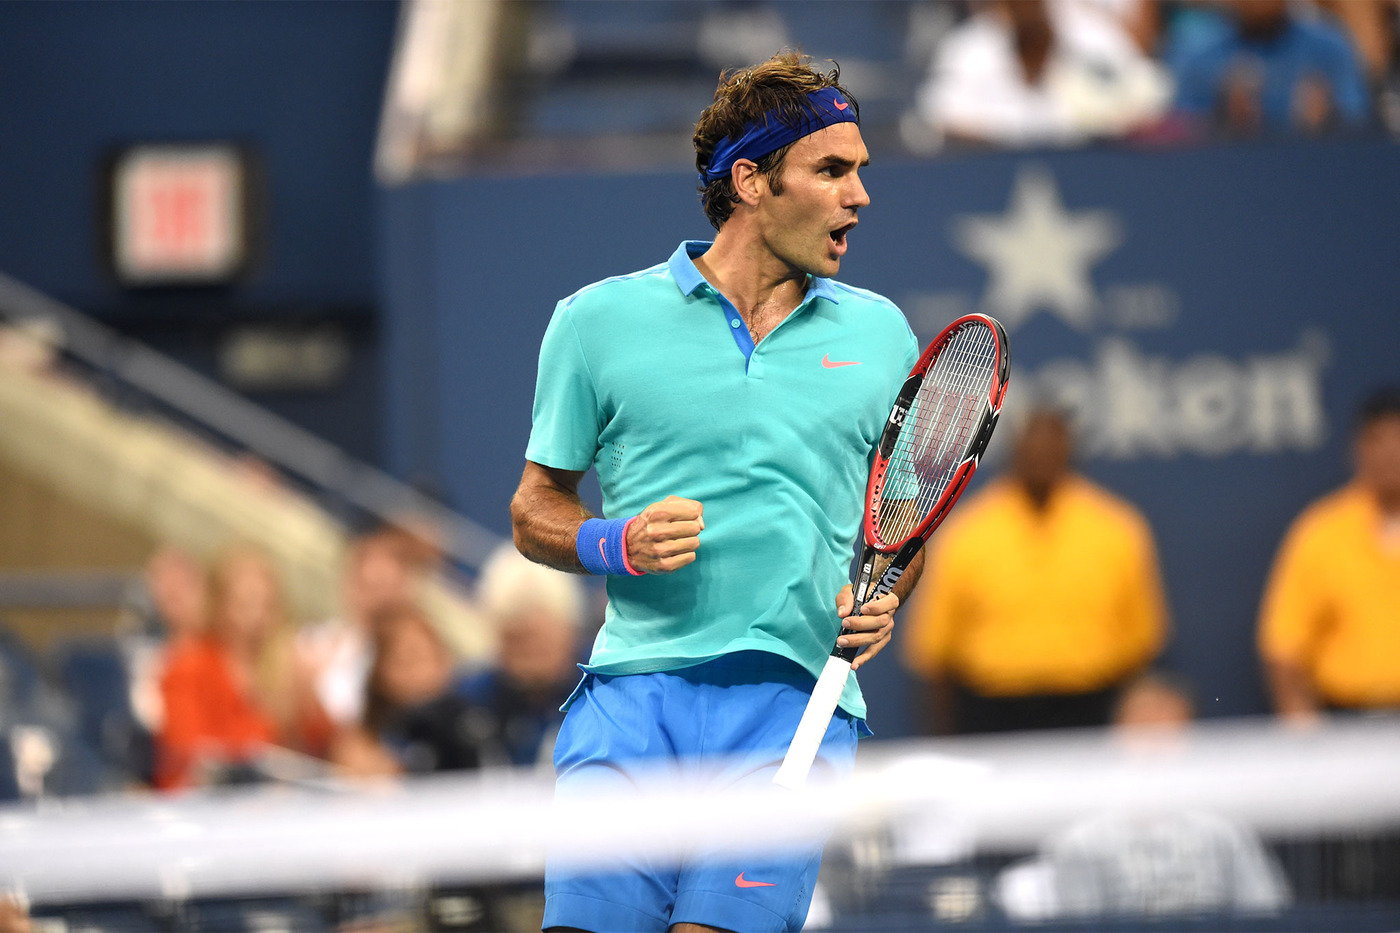 Roger Federer shows some emotion during his third-round match. - Photo Credit: Andrew Ong/usopen.org